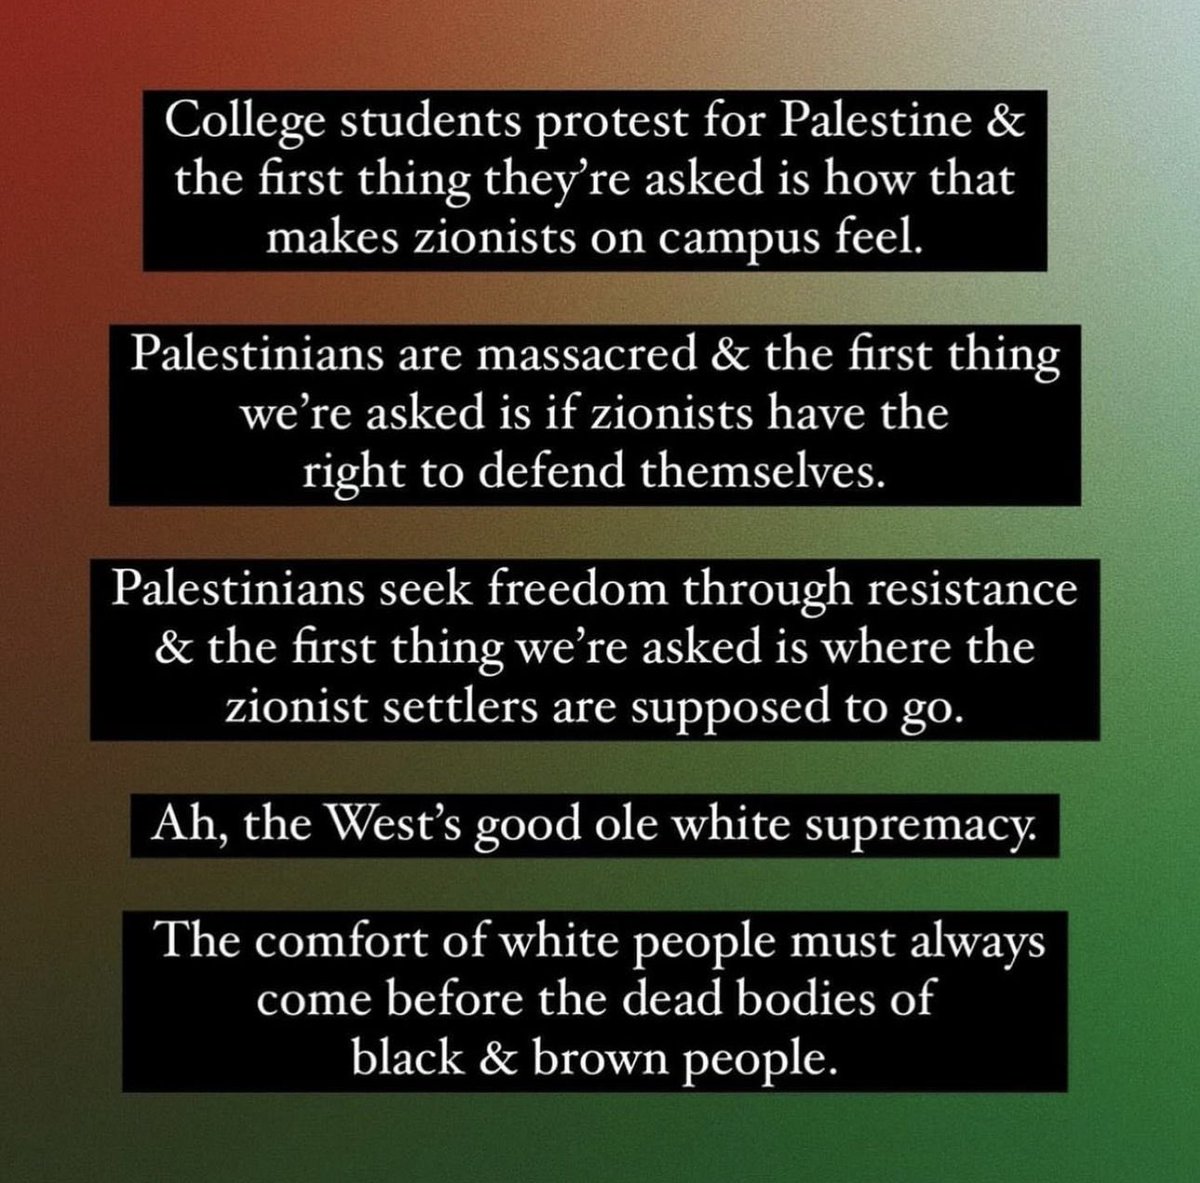 Some amazing and intrepid people worked on a resolution for Chico State’s academic senate today. It was (as expected) met with tremendous Zionist resistance. They even called in an outside guy who went on the most unhinged trauma porn rant. /1